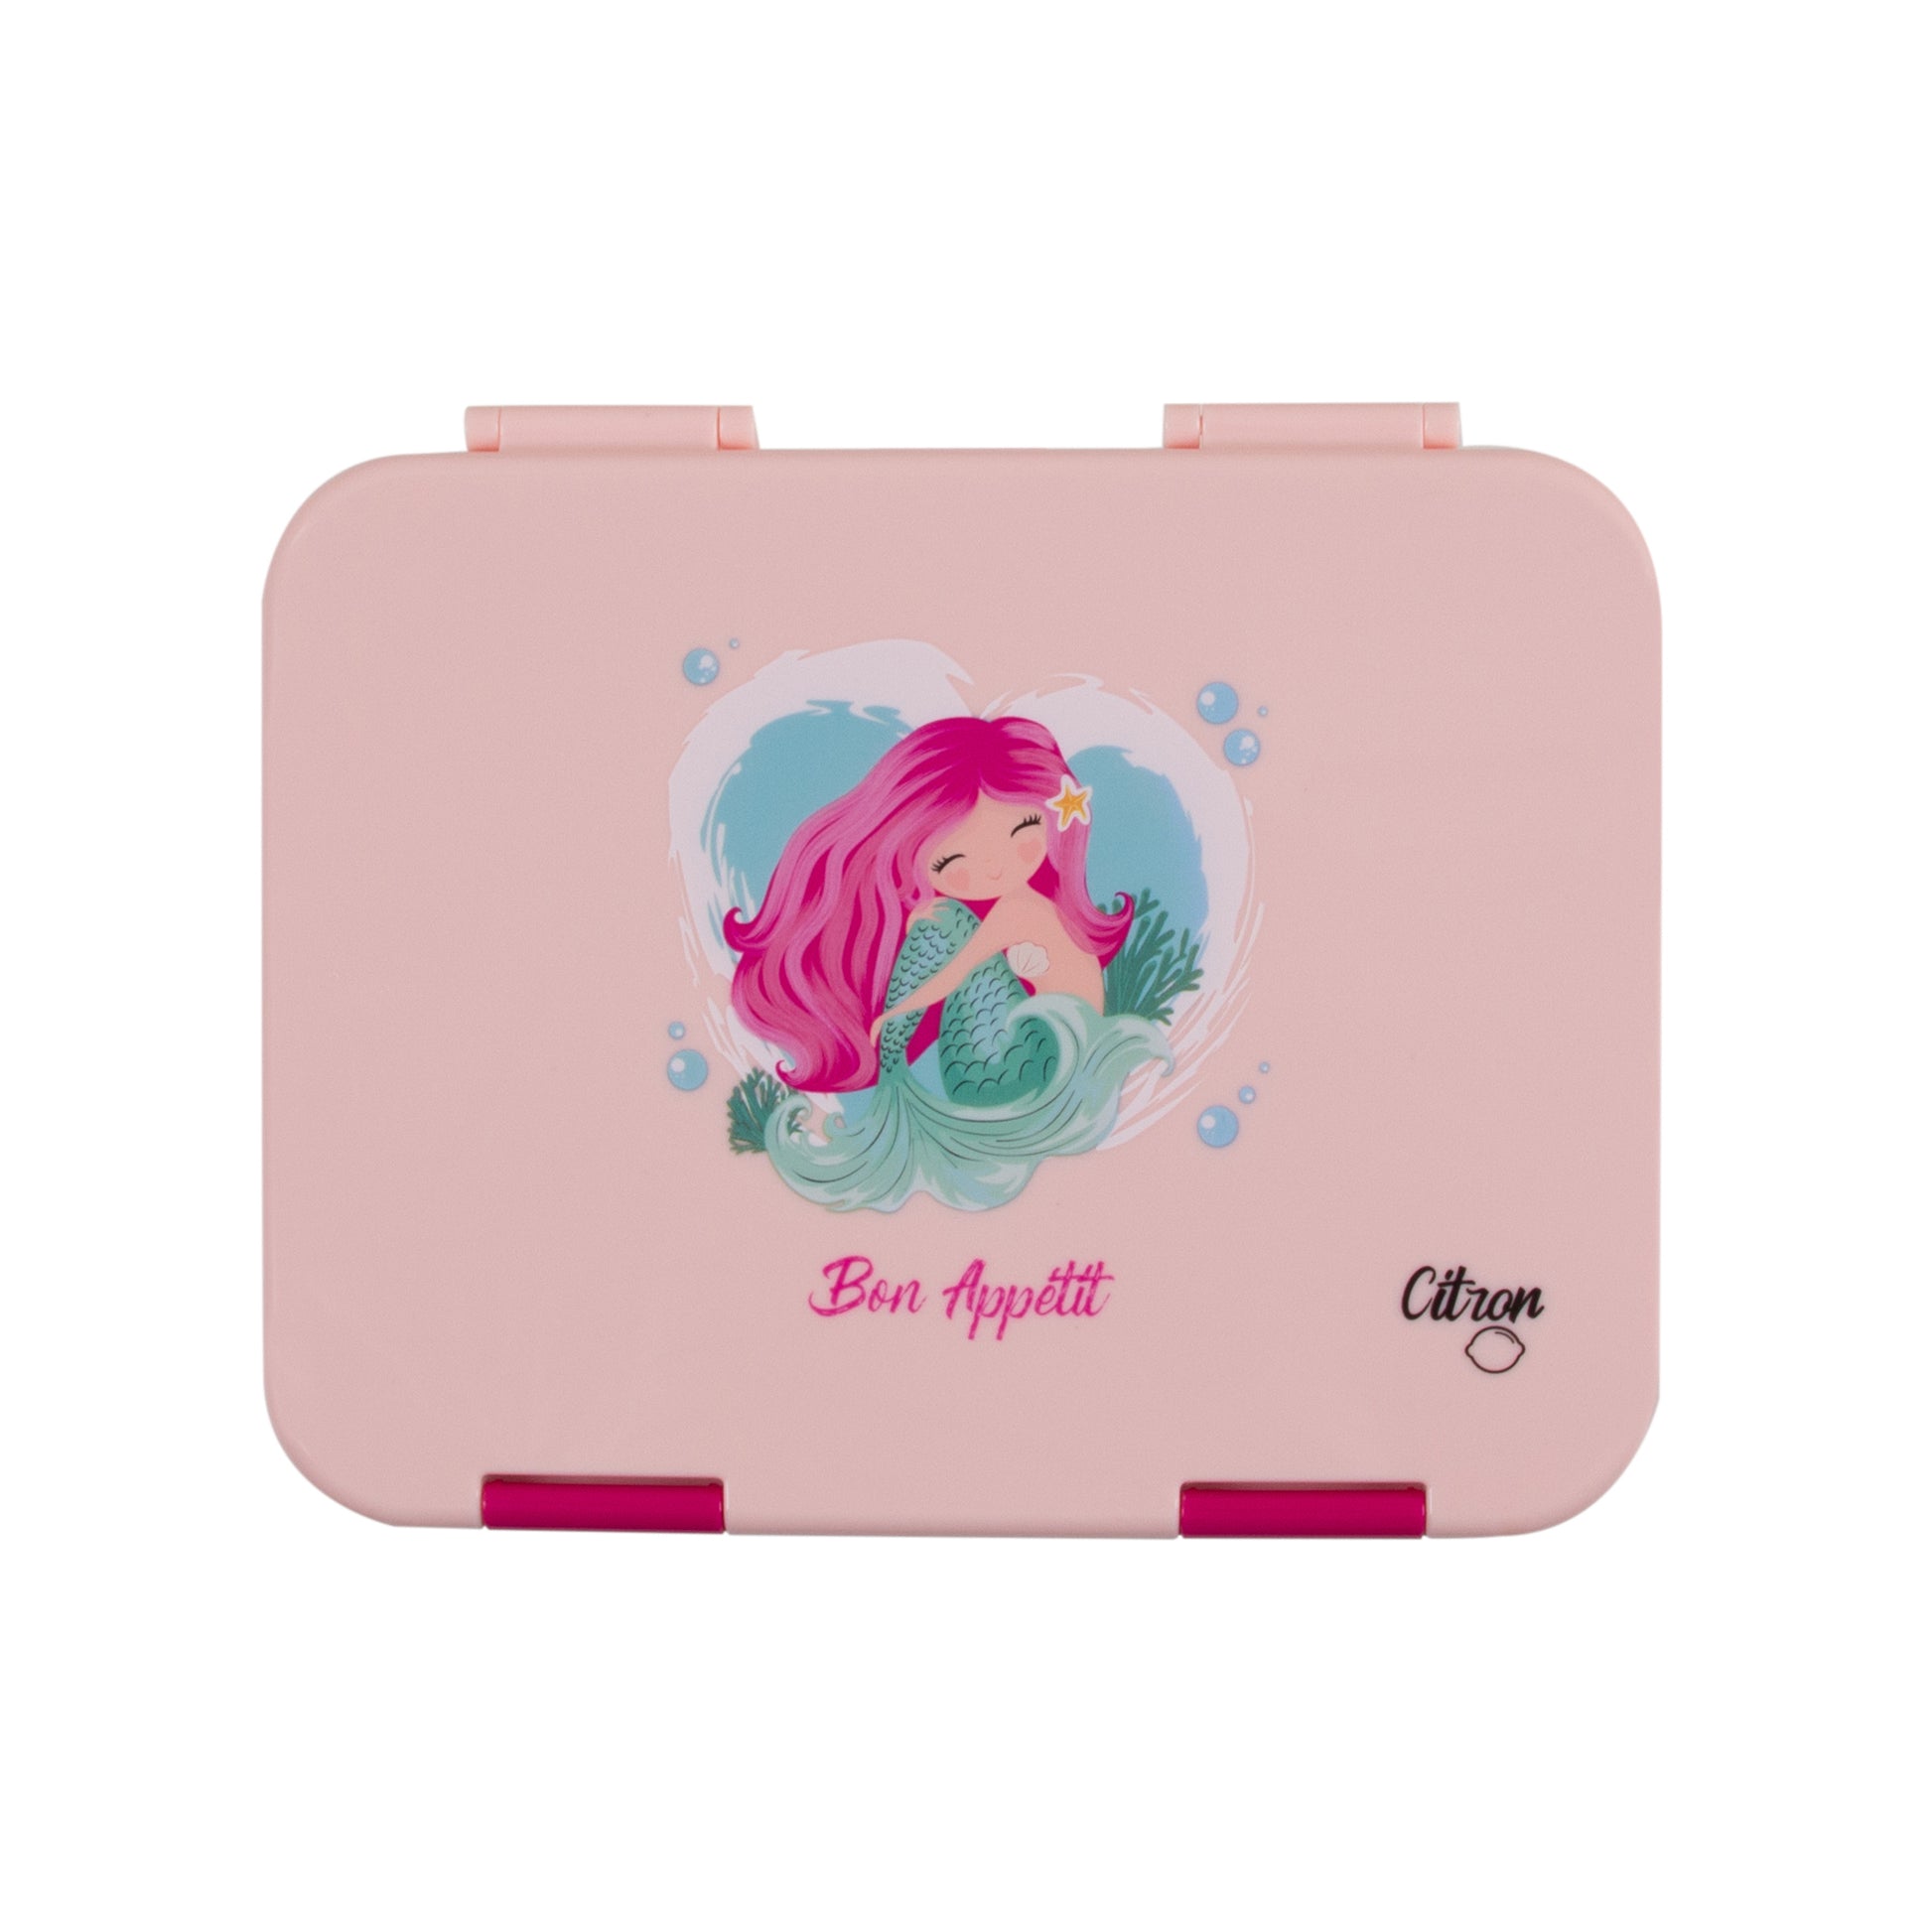 Citron Australia Kids Bento Lunchbox - 4 compartments With Accessories - Mermaid